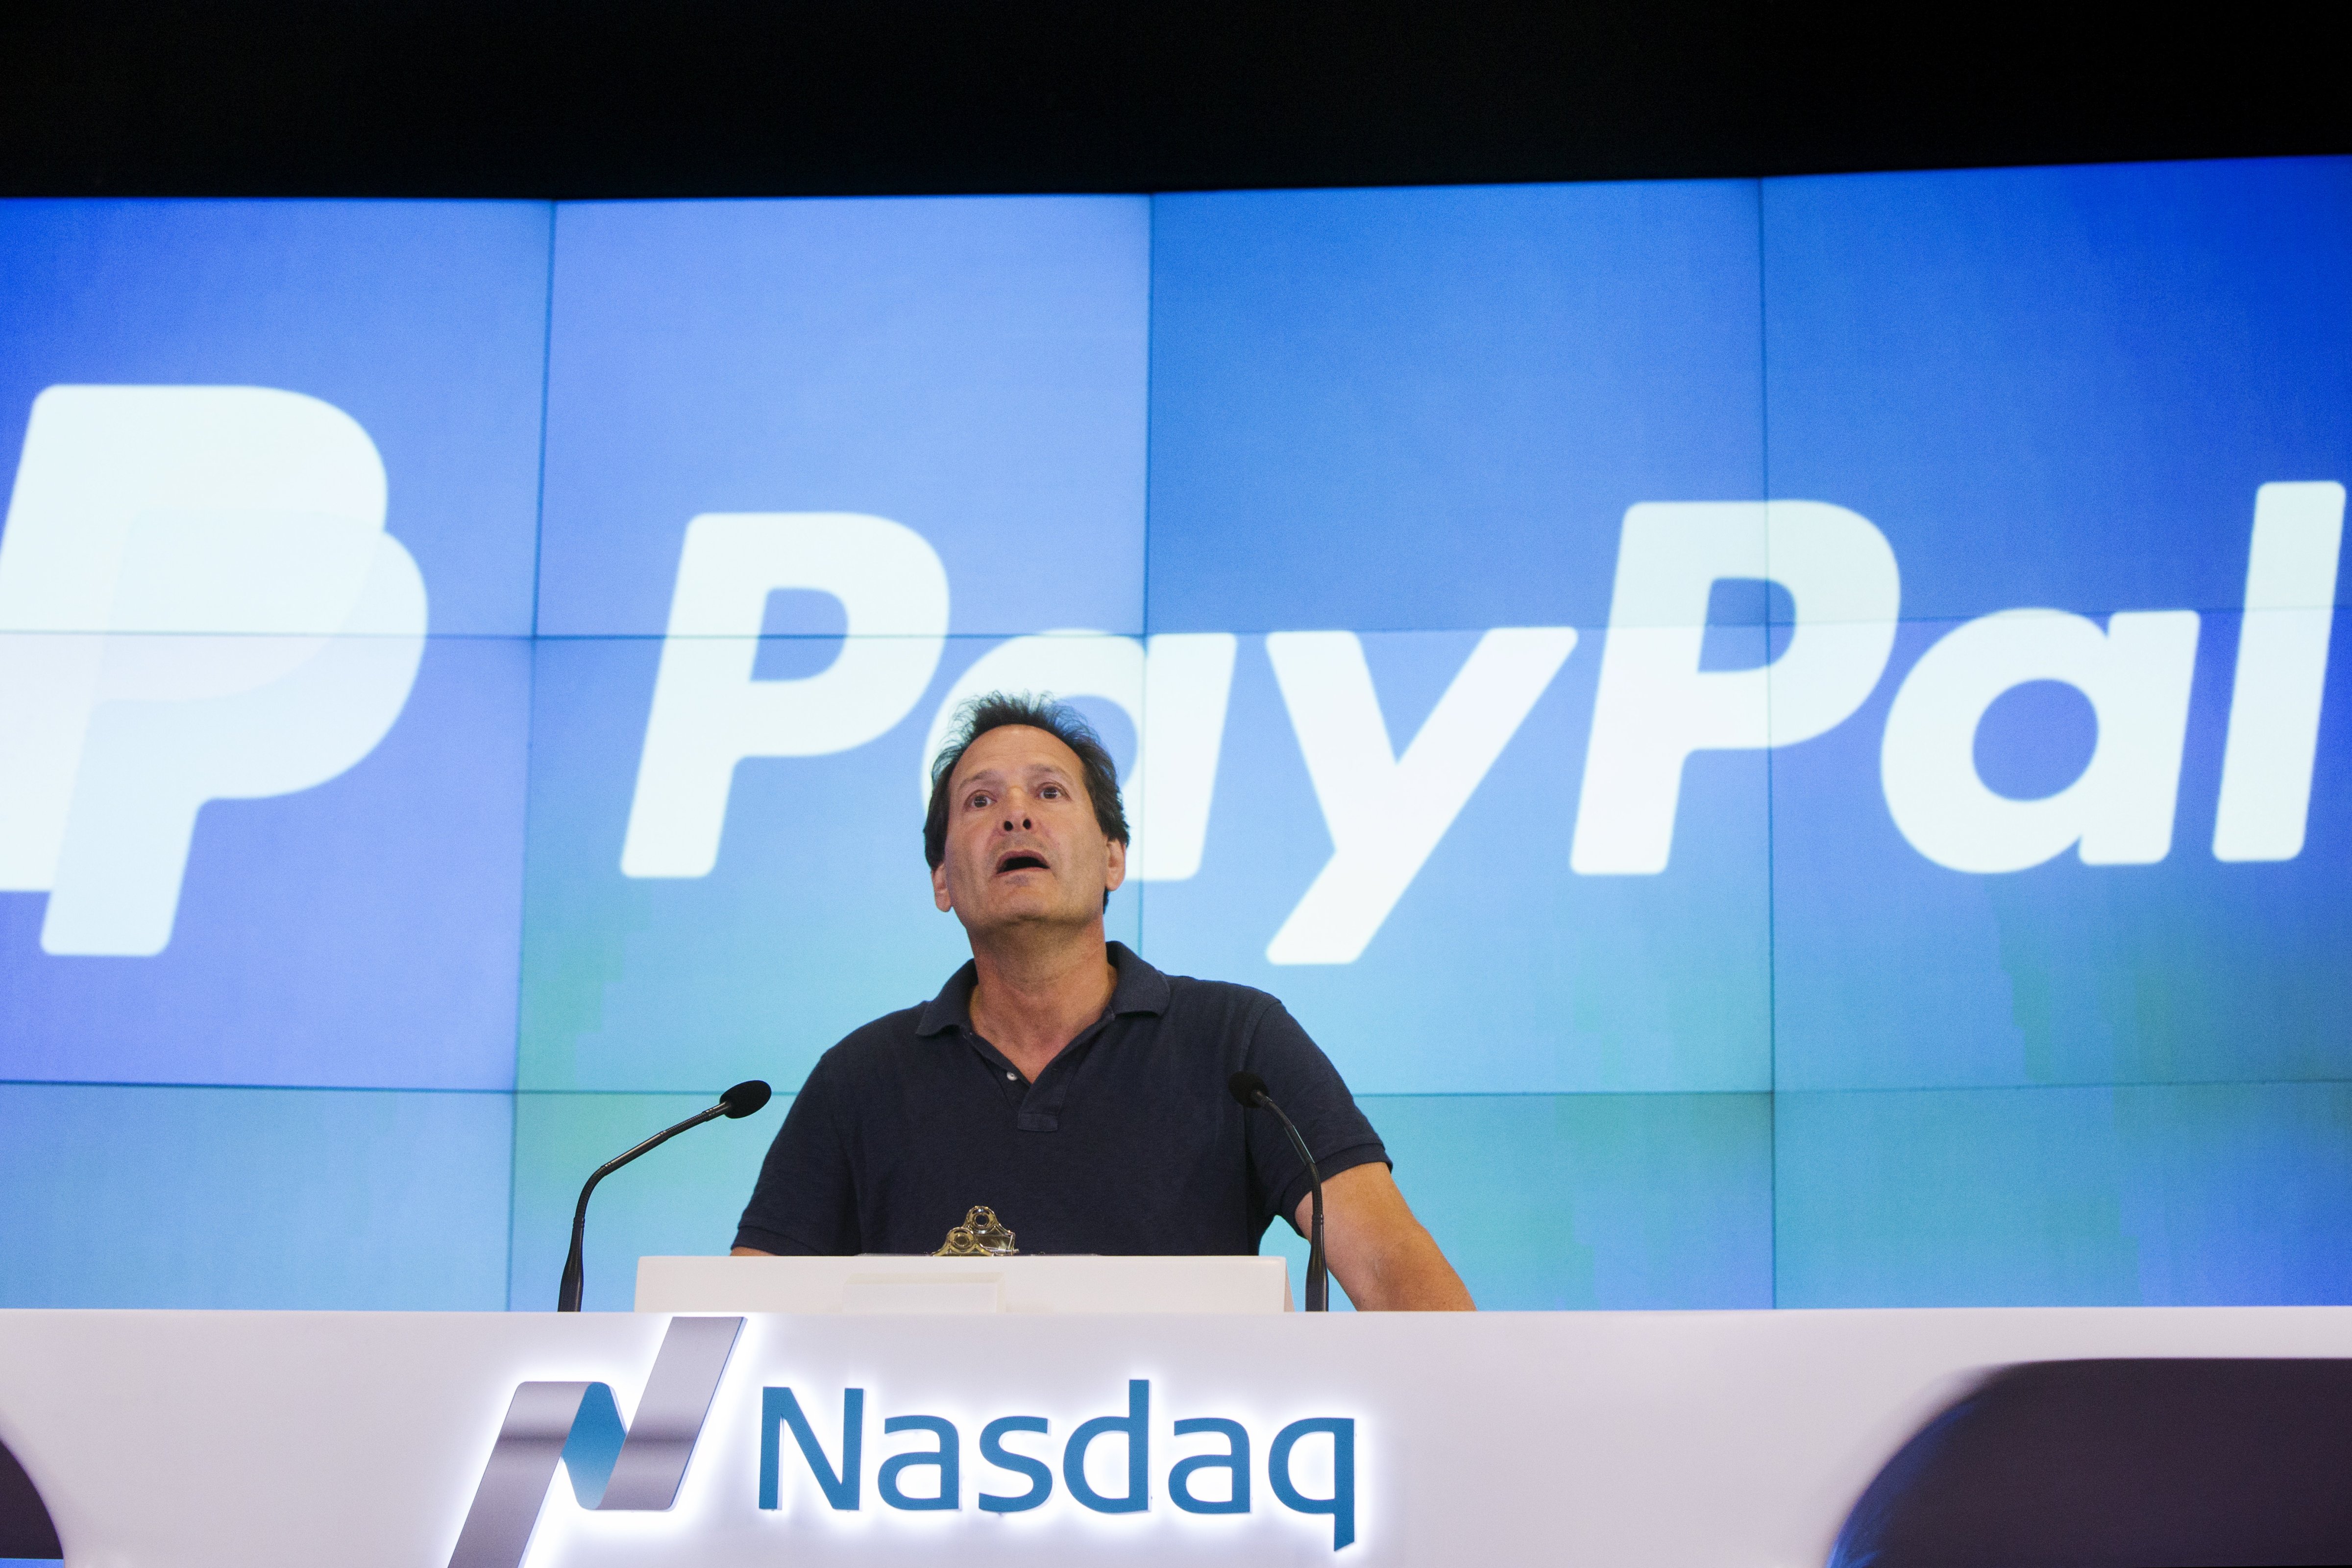 Paypal CEO Dan Schulman takes part in the company's relisting on the Nasdaq in New York